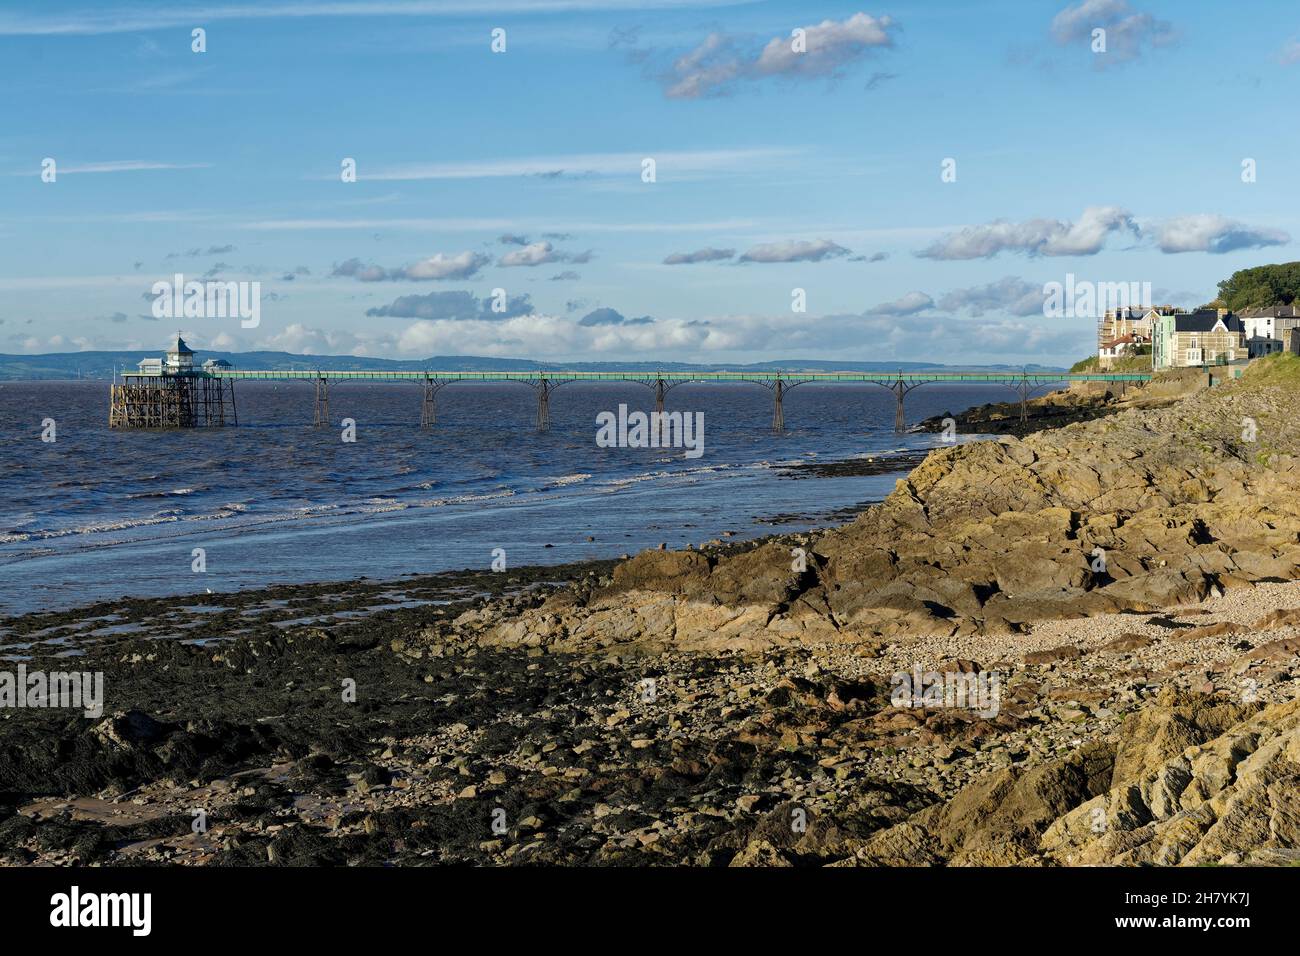 Clevedon Bay and Pier, Clevedon, North Somerset, UK Stock Photo